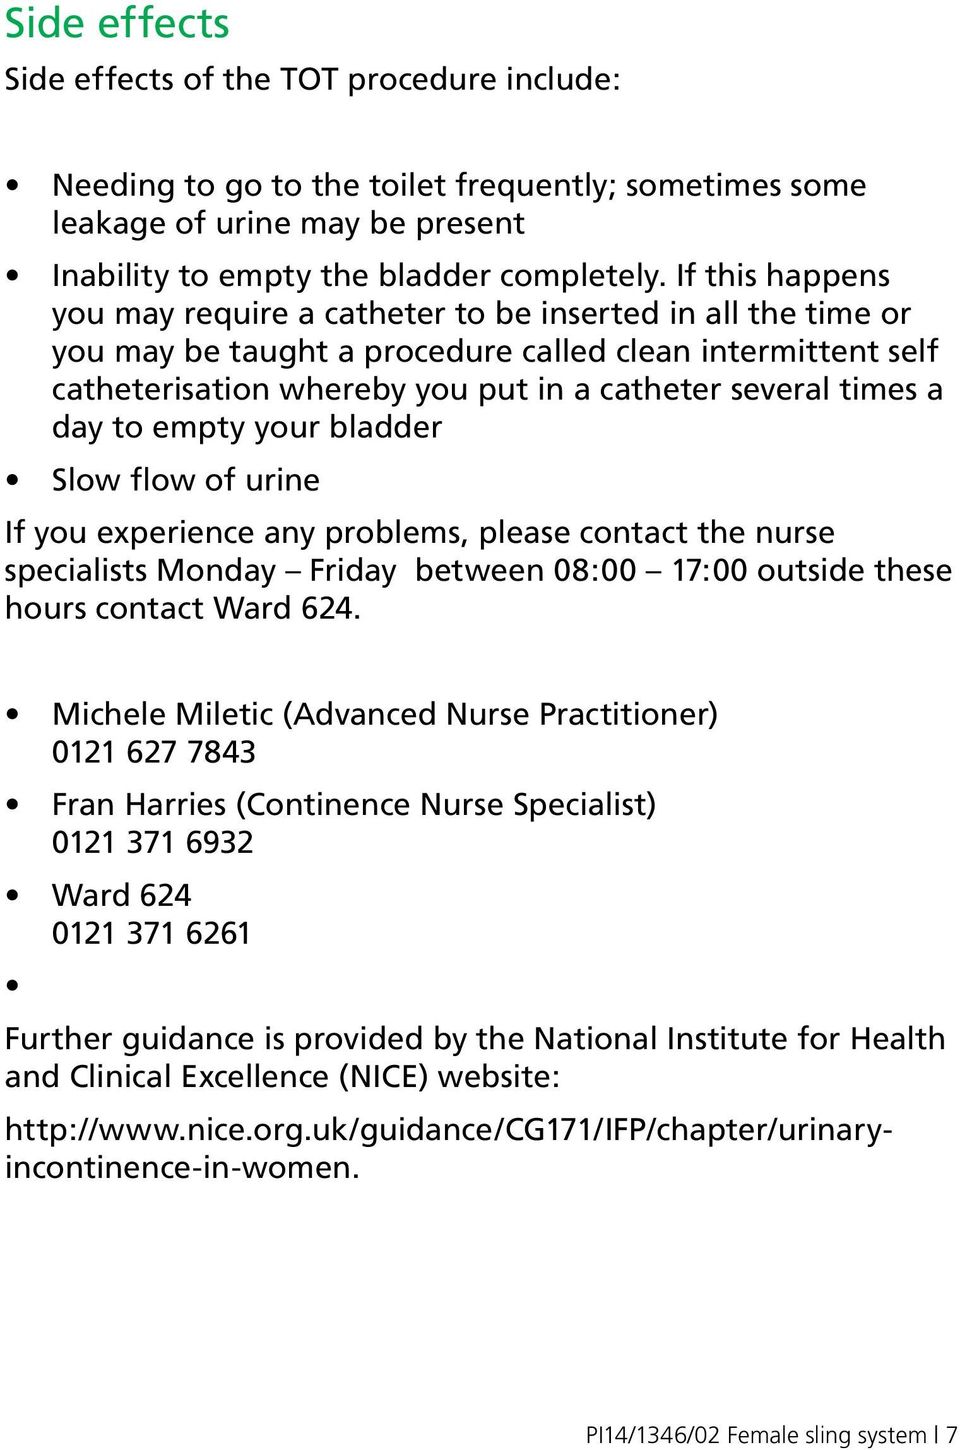 day to empty your bladder Slow flow of urine If you experience any problems, please contact the nurse specialists Monday Friday between 08:00 17:00 outside these hours contact Ward 624.